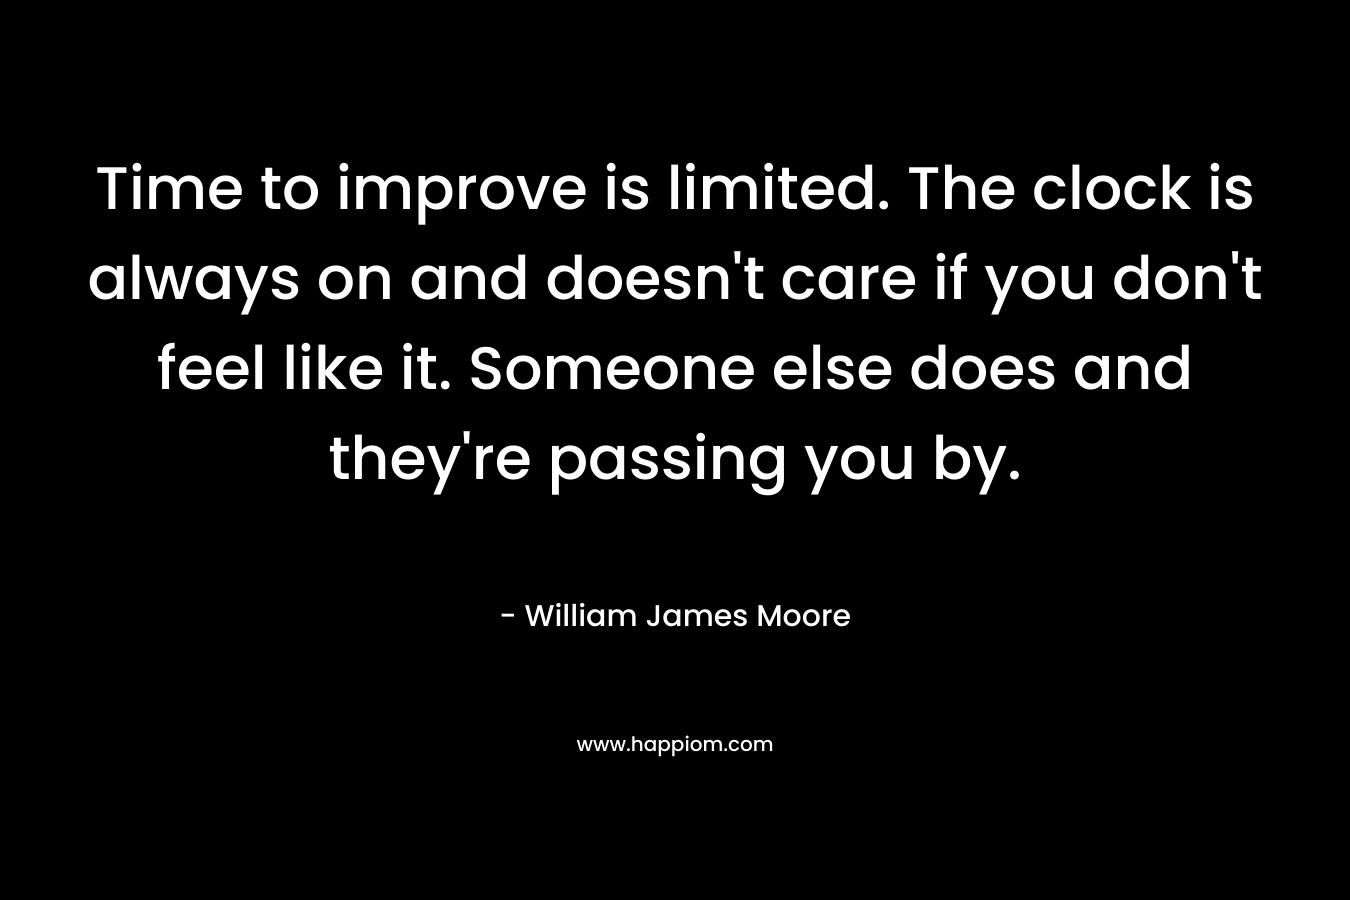 Time to improve is limited. The clock is always on and doesn’t care if you don’t feel like it. Someone else does and they’re passing you by. – William James Moore